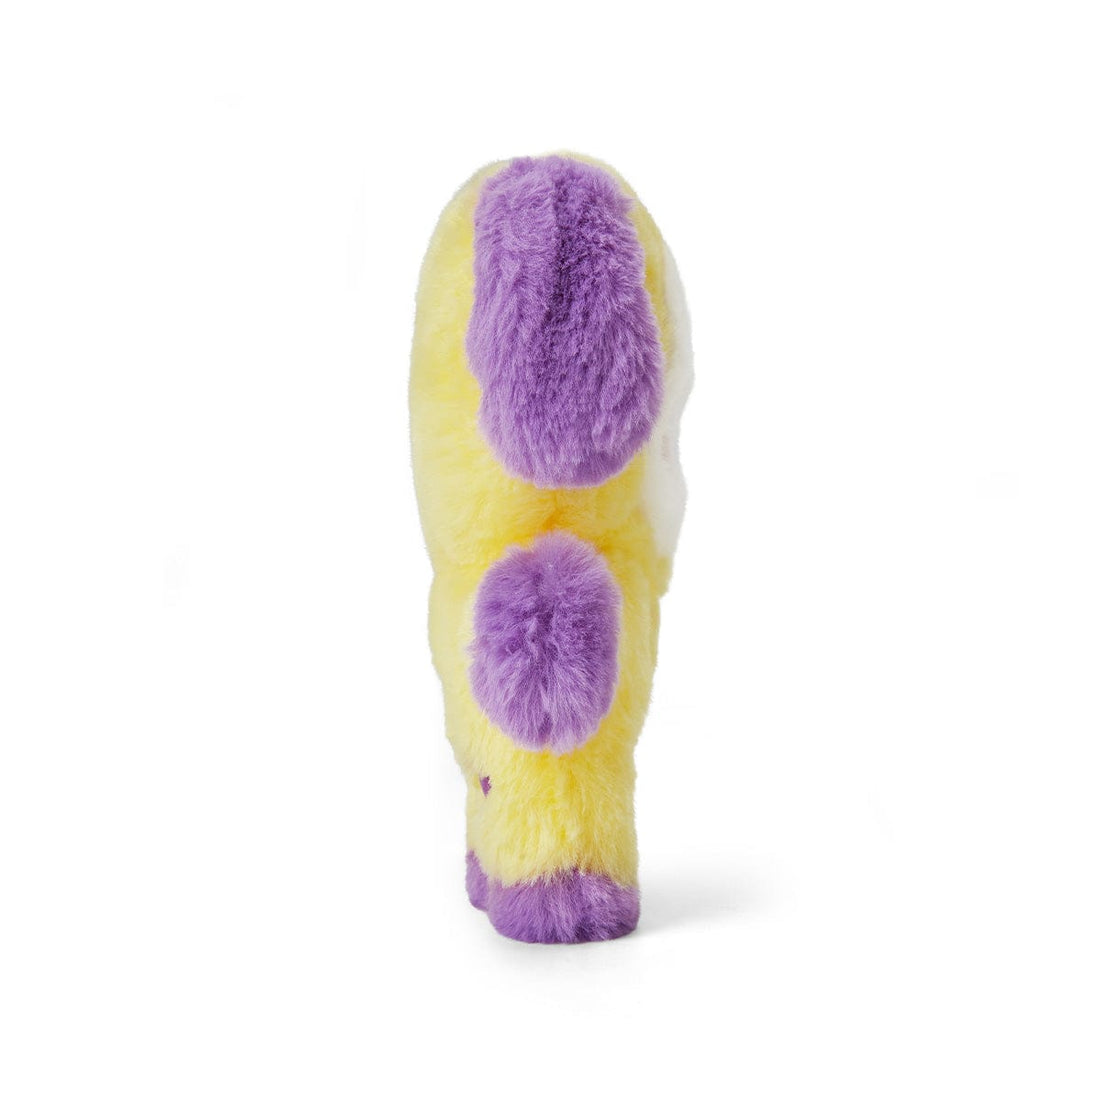 BT21 TOYS CHIMMY BT21 BABY CHIMMY FLAT FUR STANDING DOLL PURPLE HEART EDITION